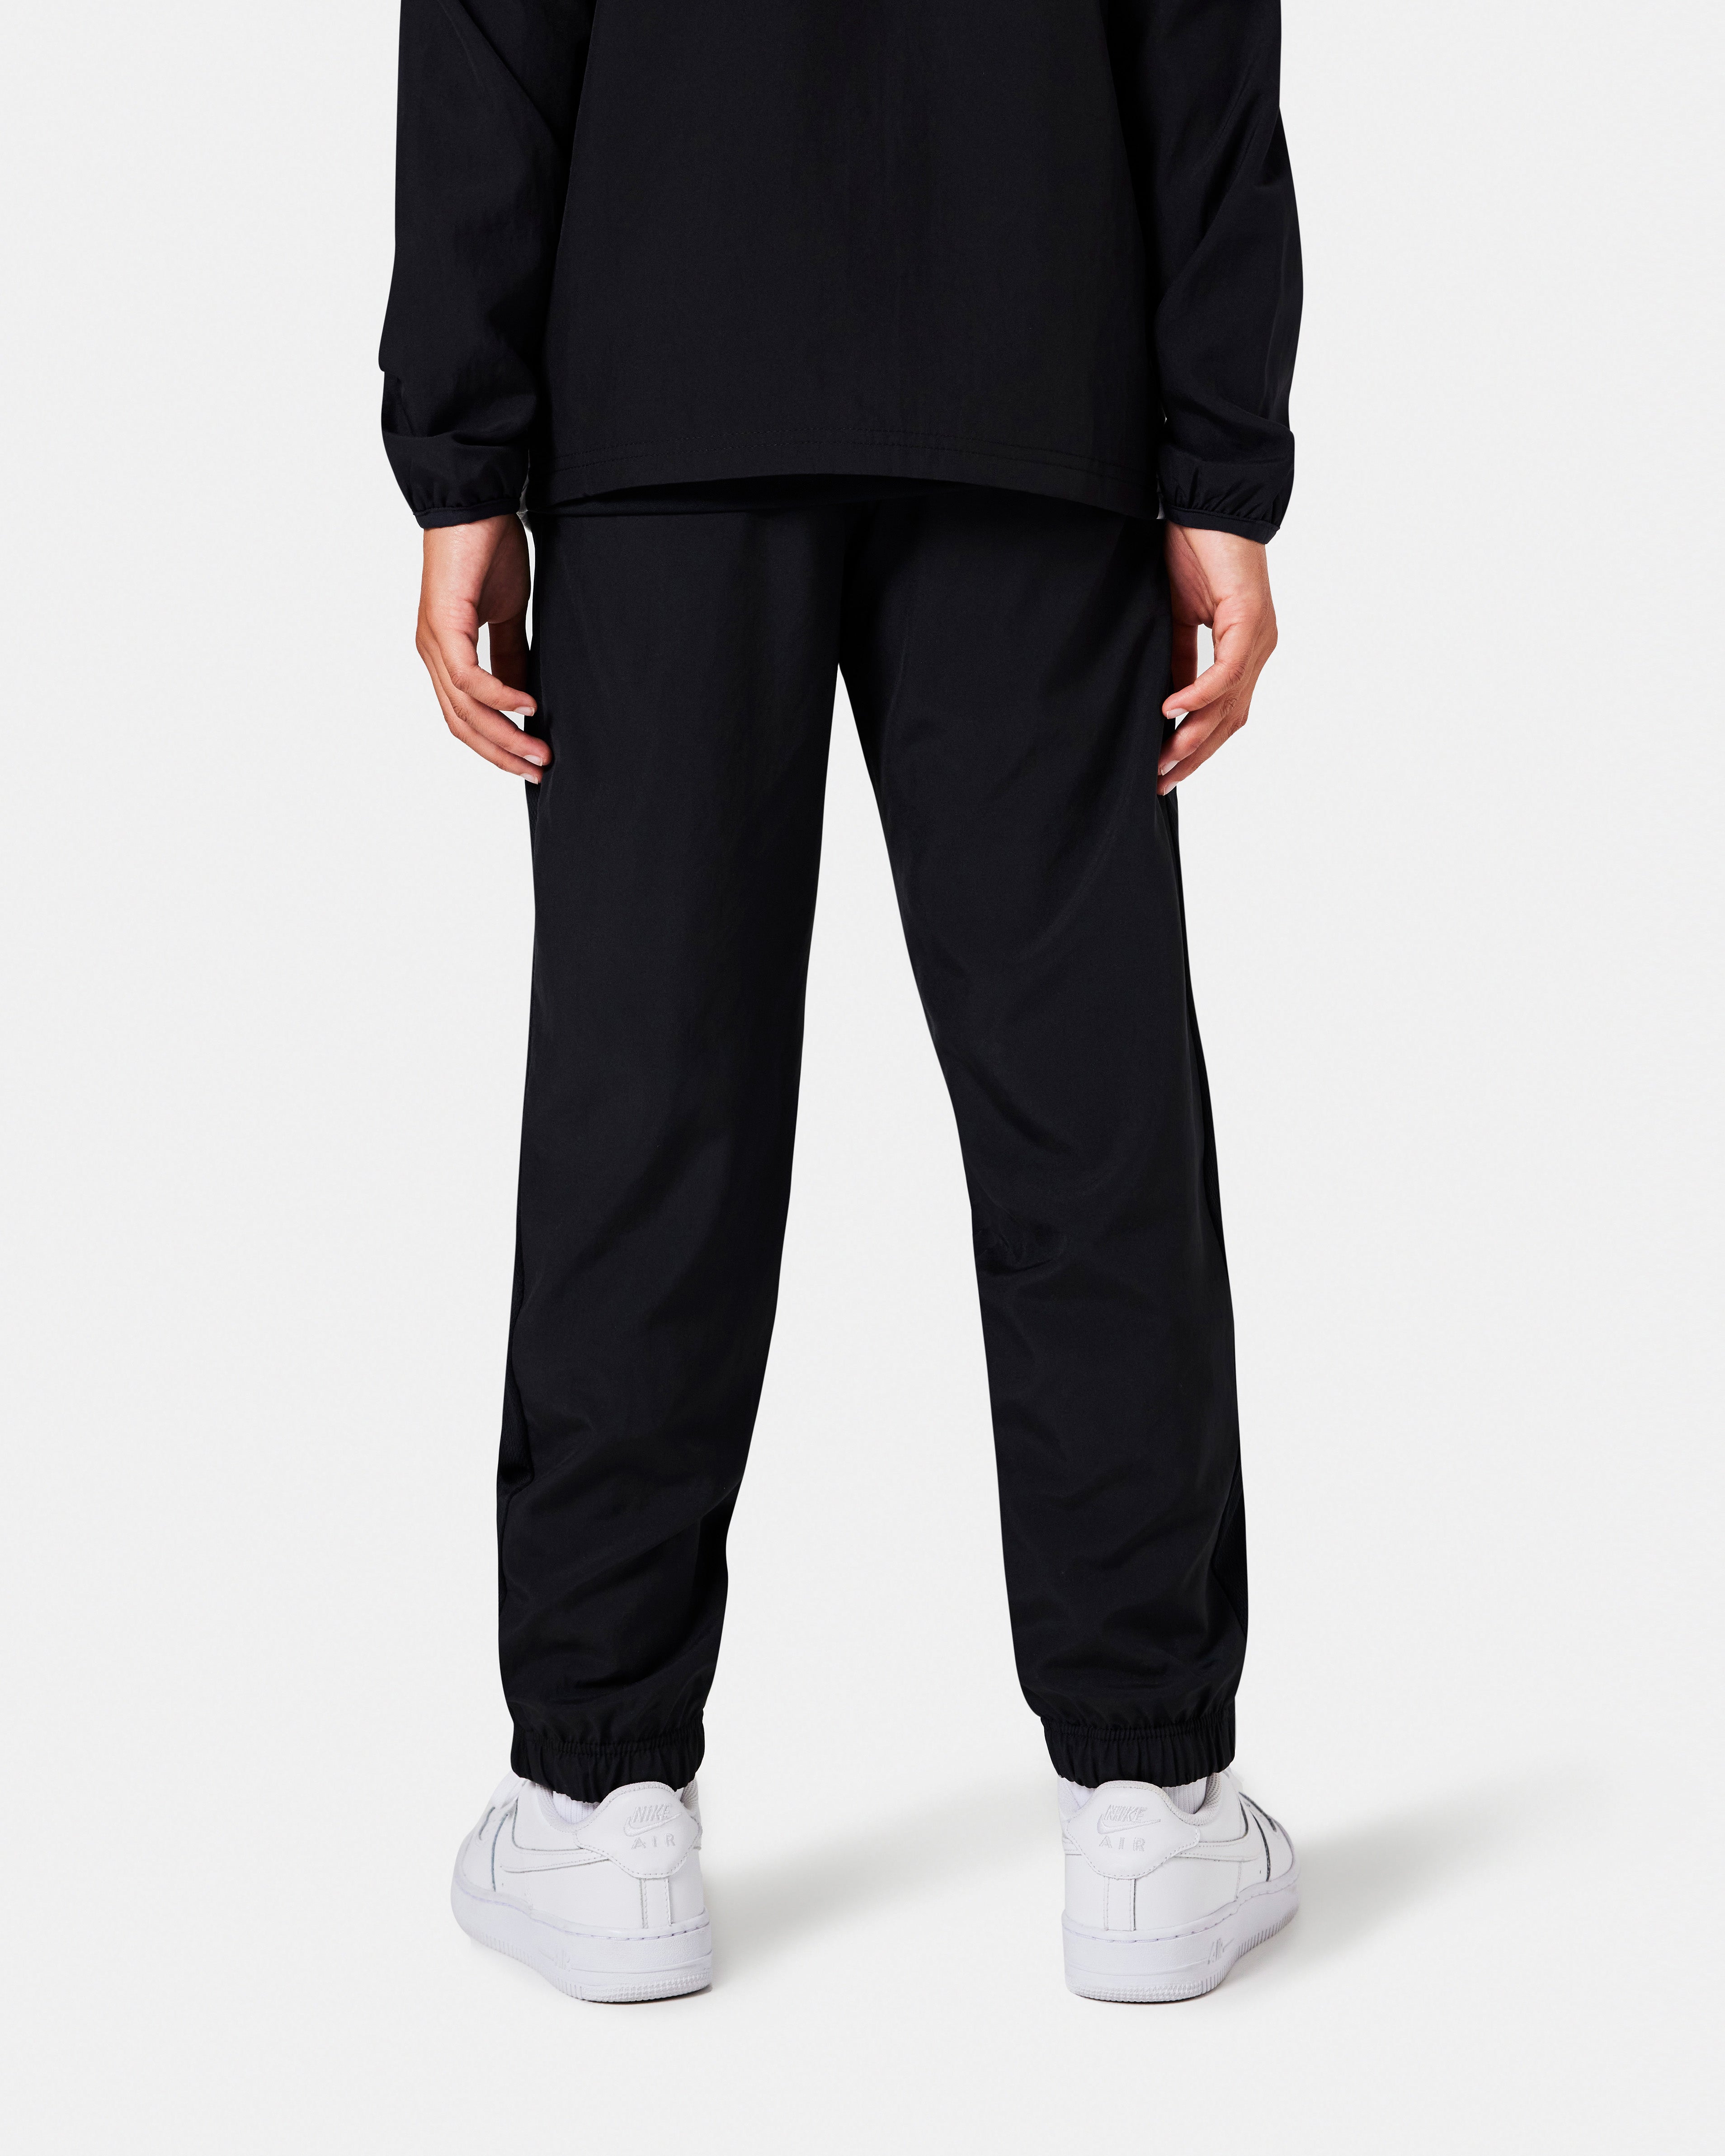 Academy 23 Woven Track Pant (Youth)